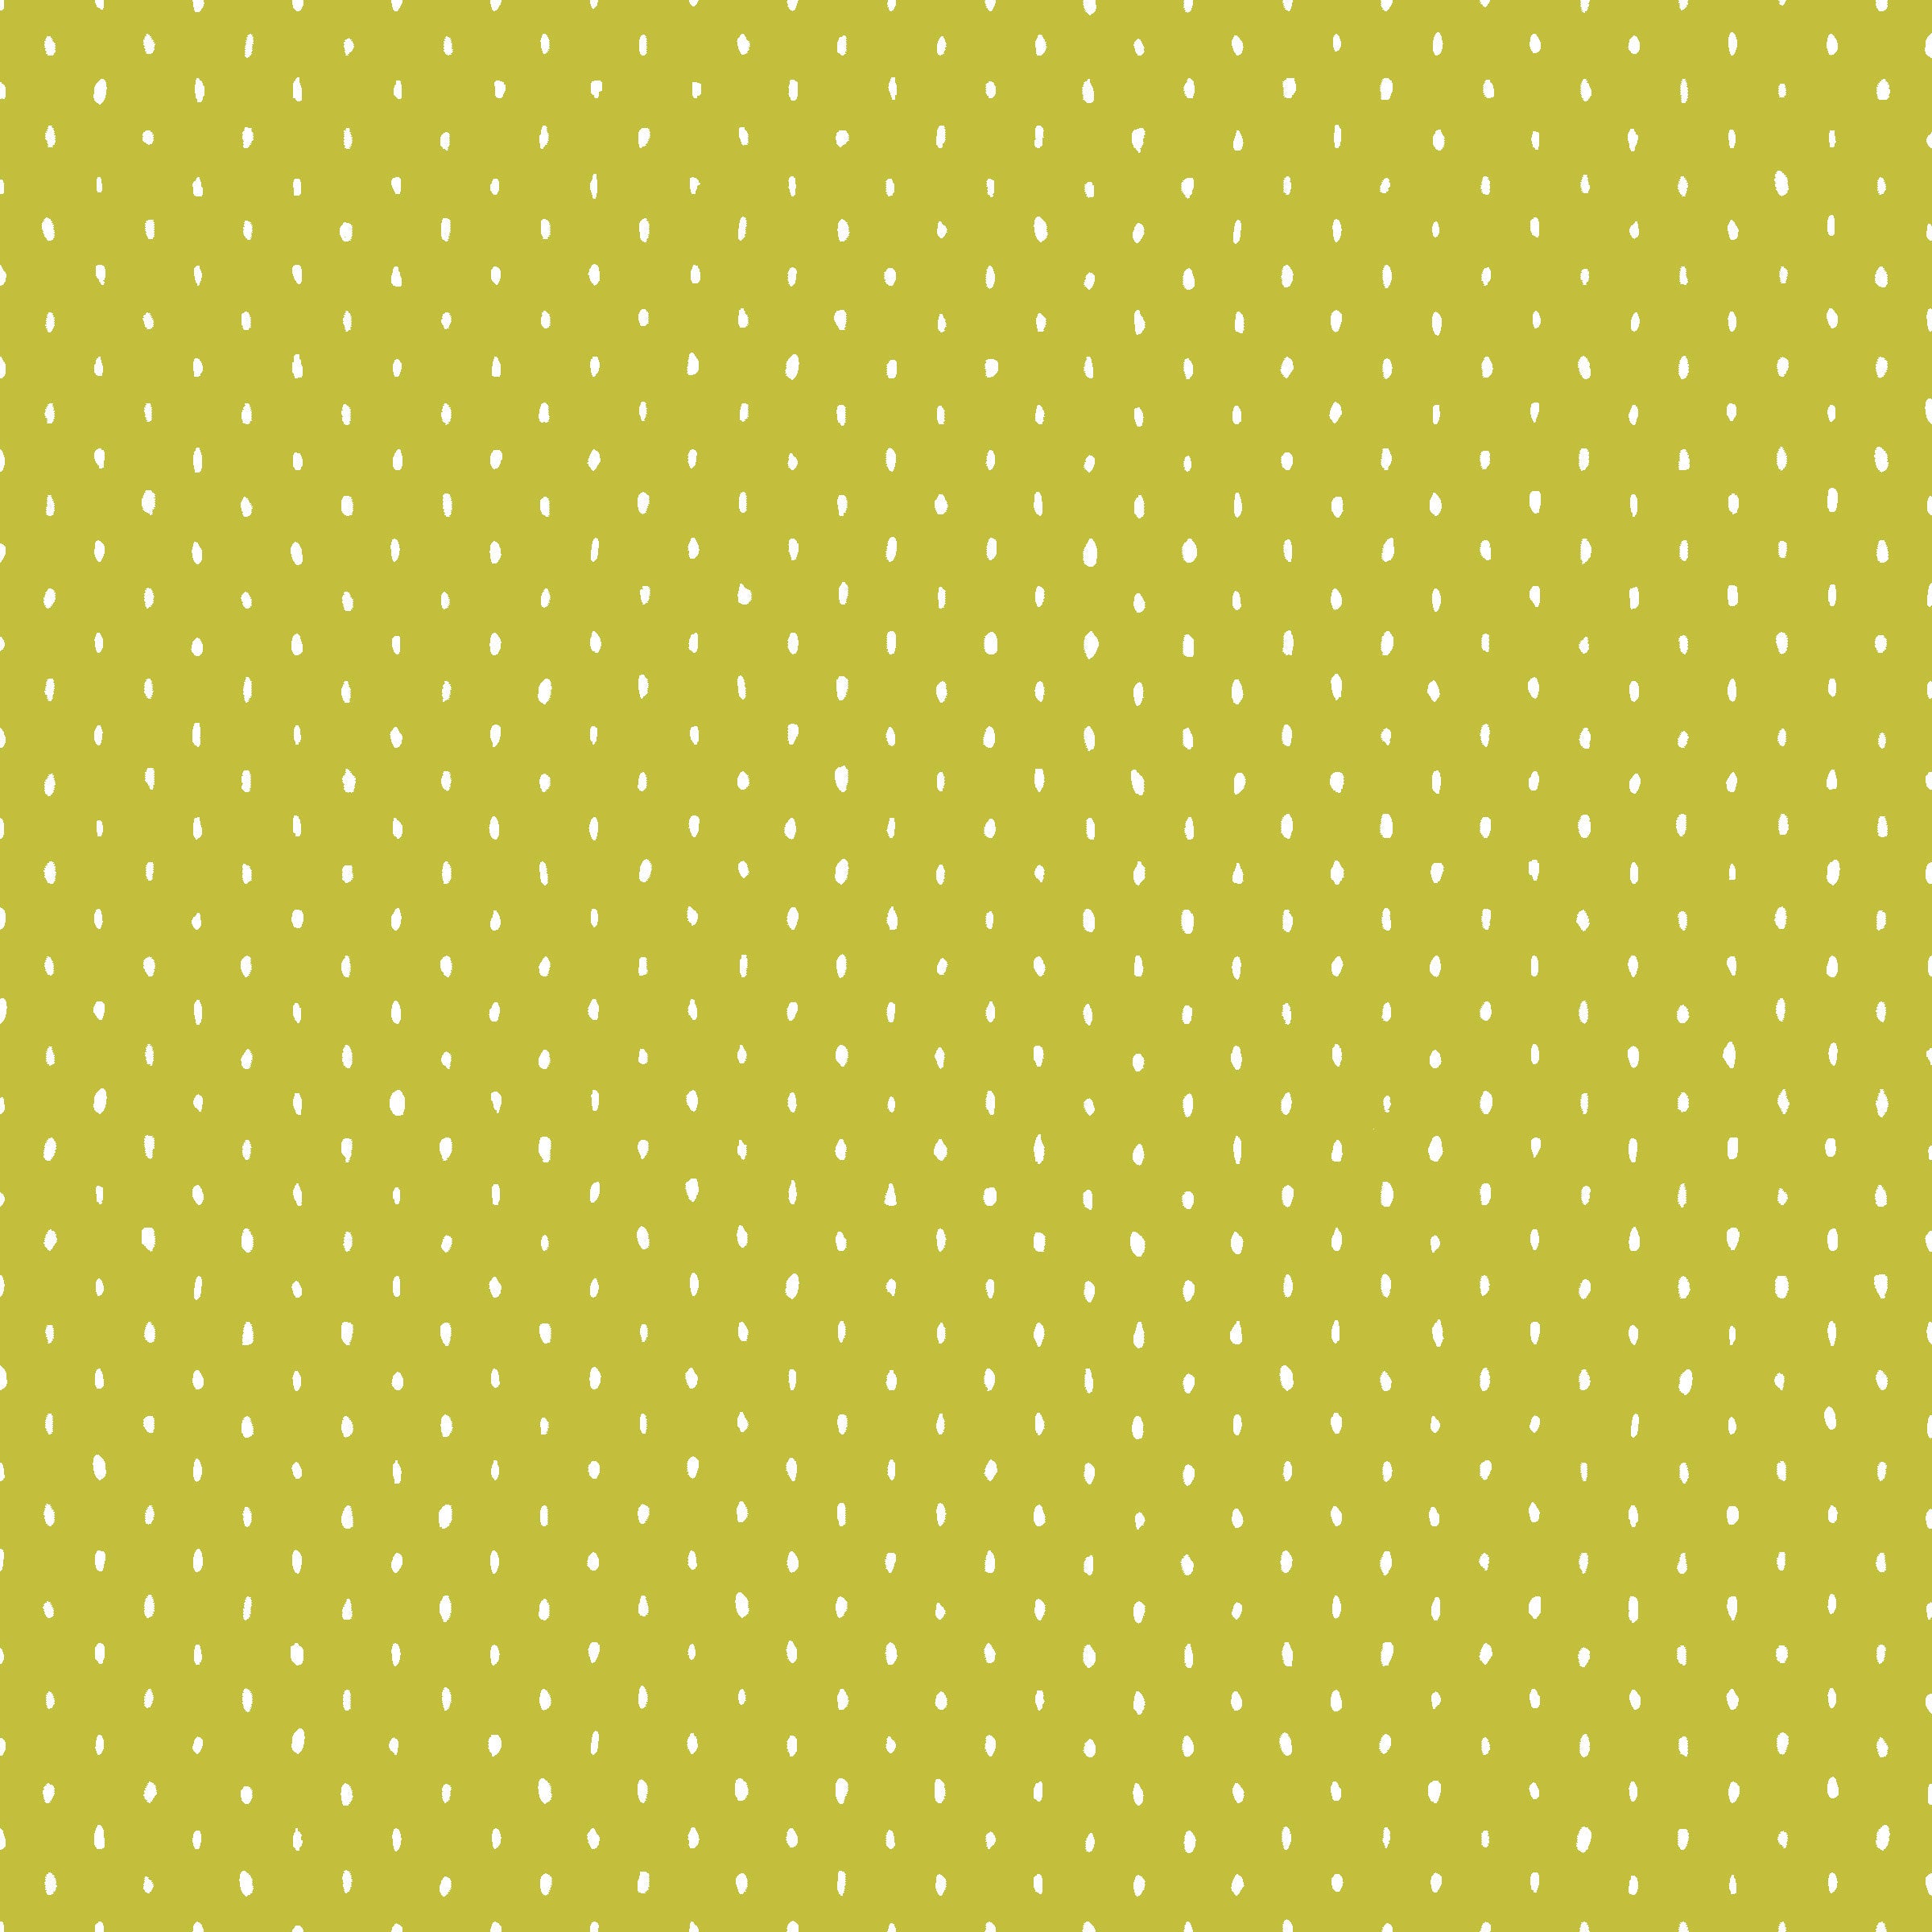 Cotton + Steel Basics Quilt Fabric - Stitch and Repeat (Oval Dots) in Avocado Green/Gold - CS101-AV6